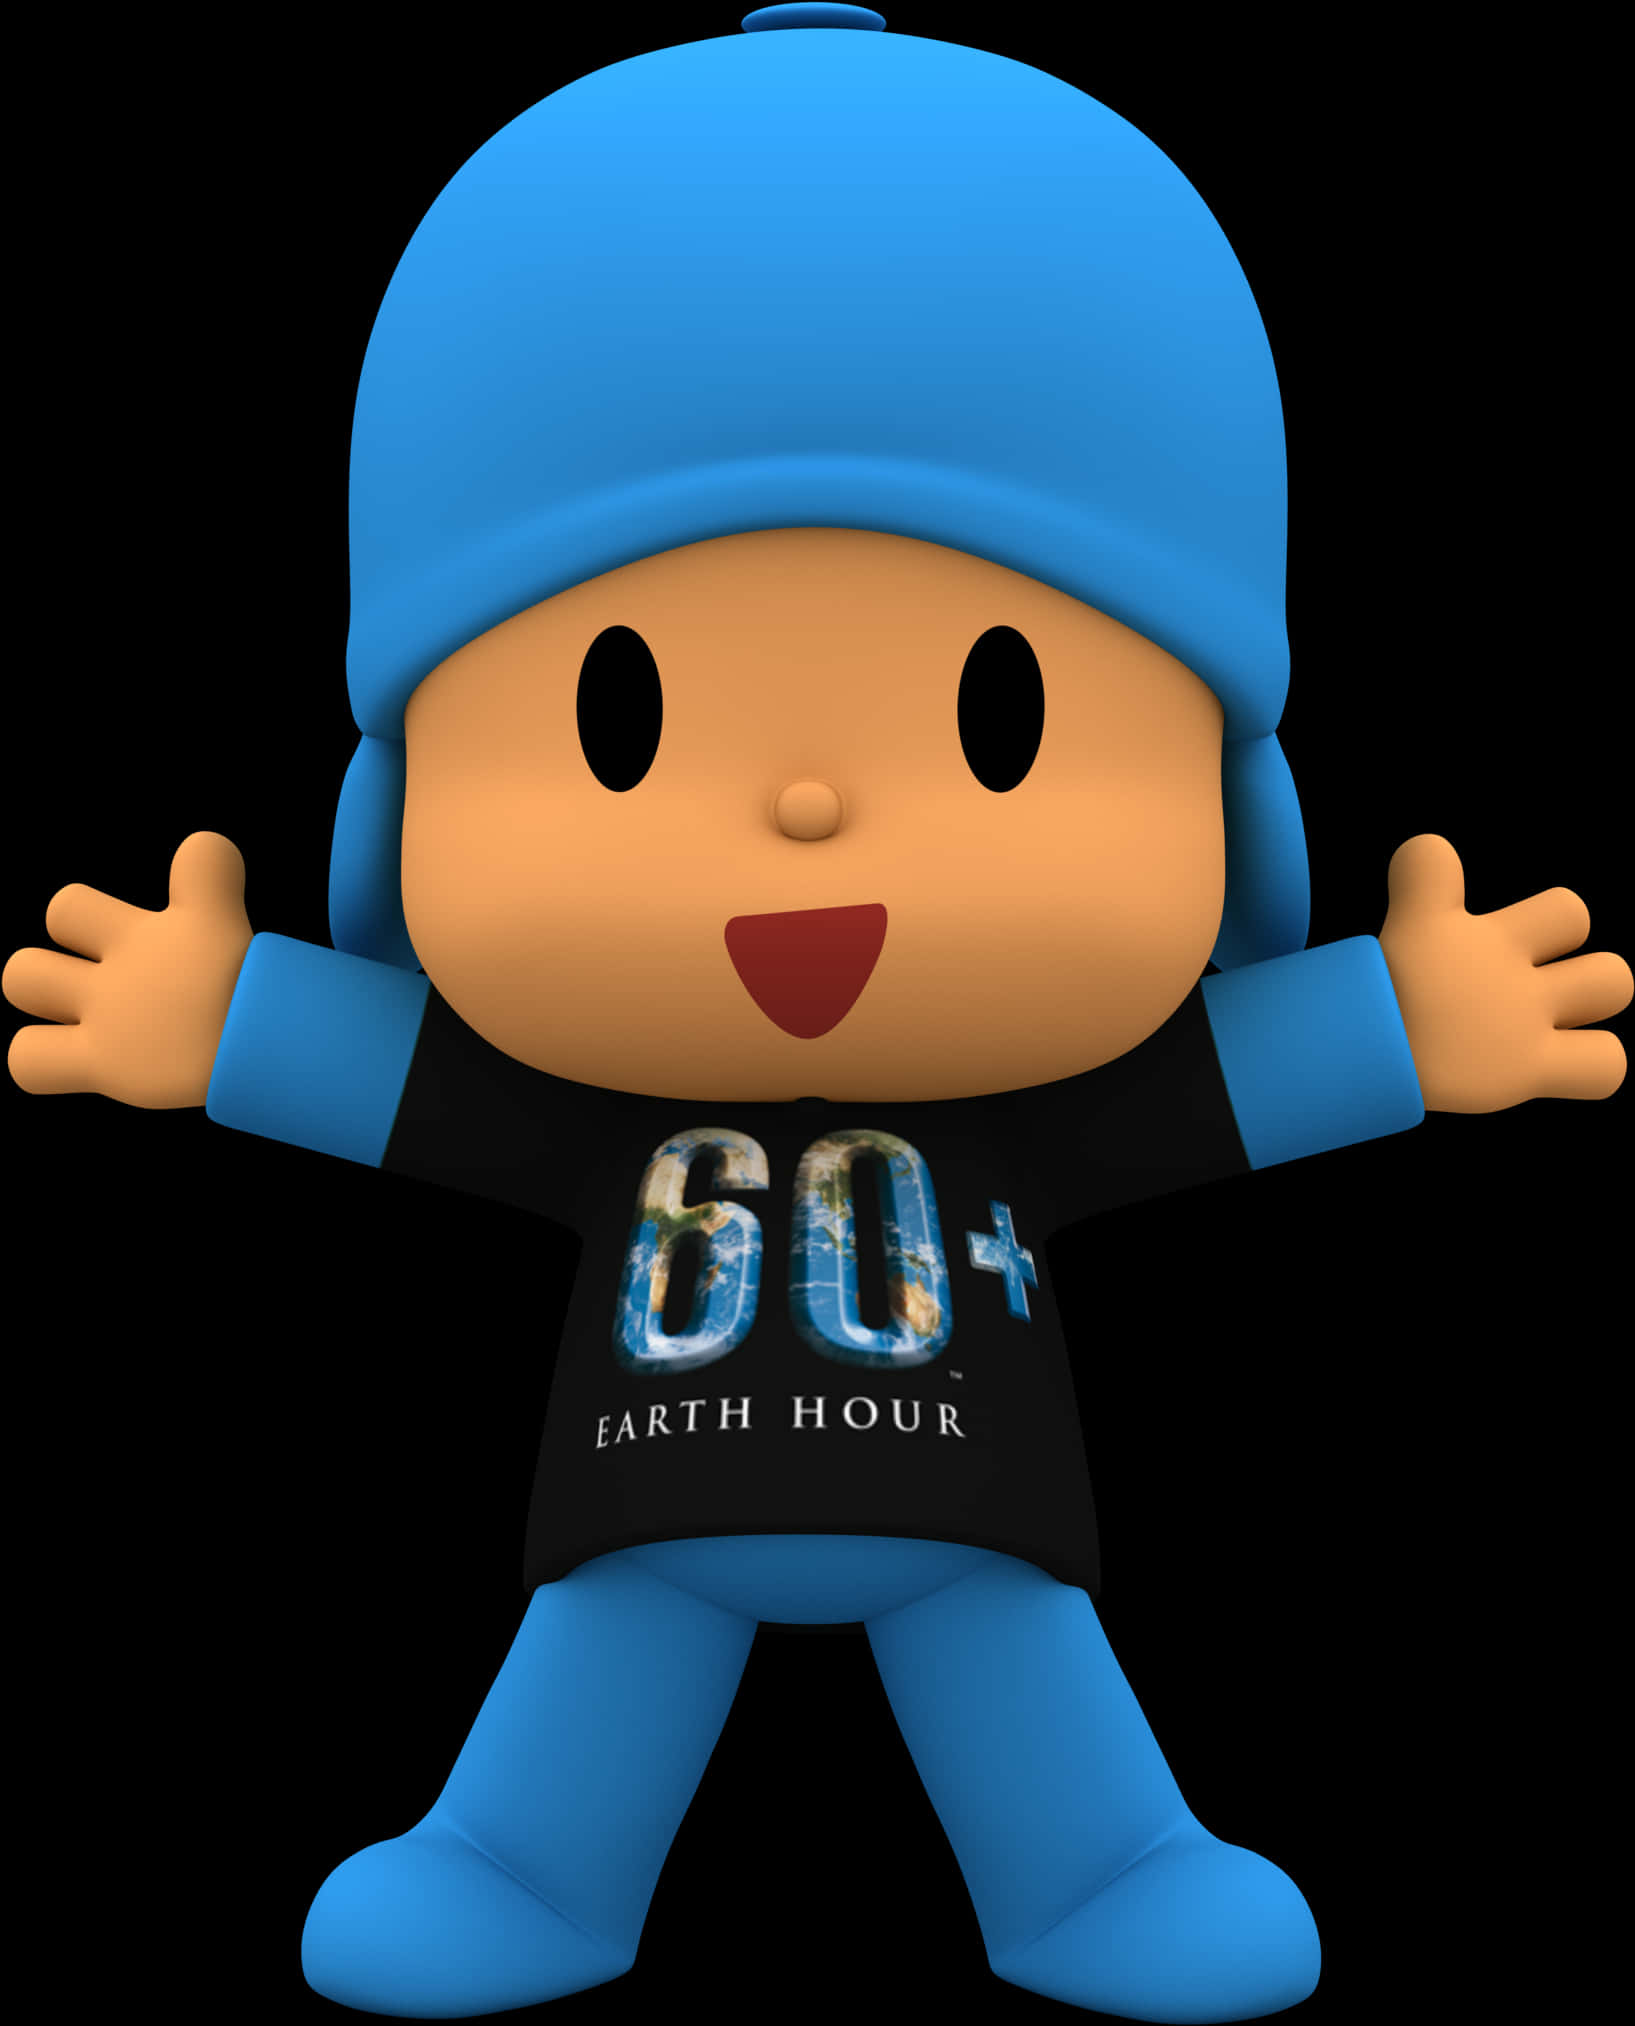 A Cartoon Character With Blue Hat And Black Shirt